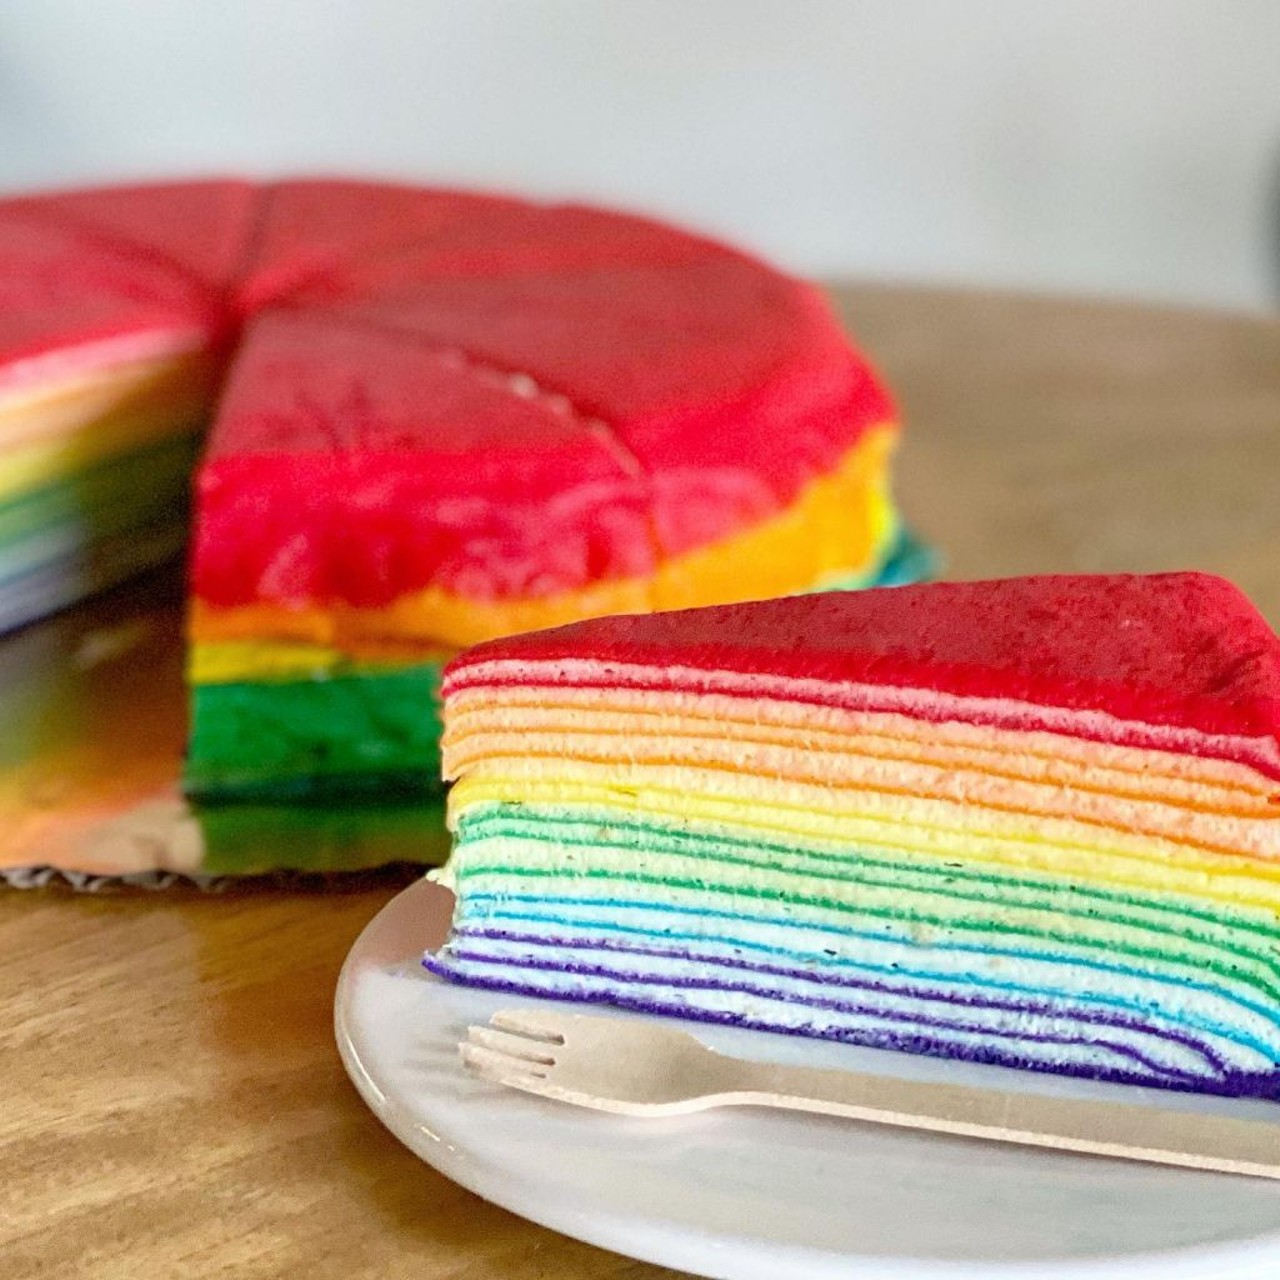 Light On The Sugar 
4270 Aloma Ave Suite #112 Winter Park FL 32792, (407) 916-0215
While they are known for their delicious teas and pastries, this month they have exploded social media with their new Pride options, including the Rainbow Vanilla Crepe cake. 
Photo via Light On the Sugar/Facebook